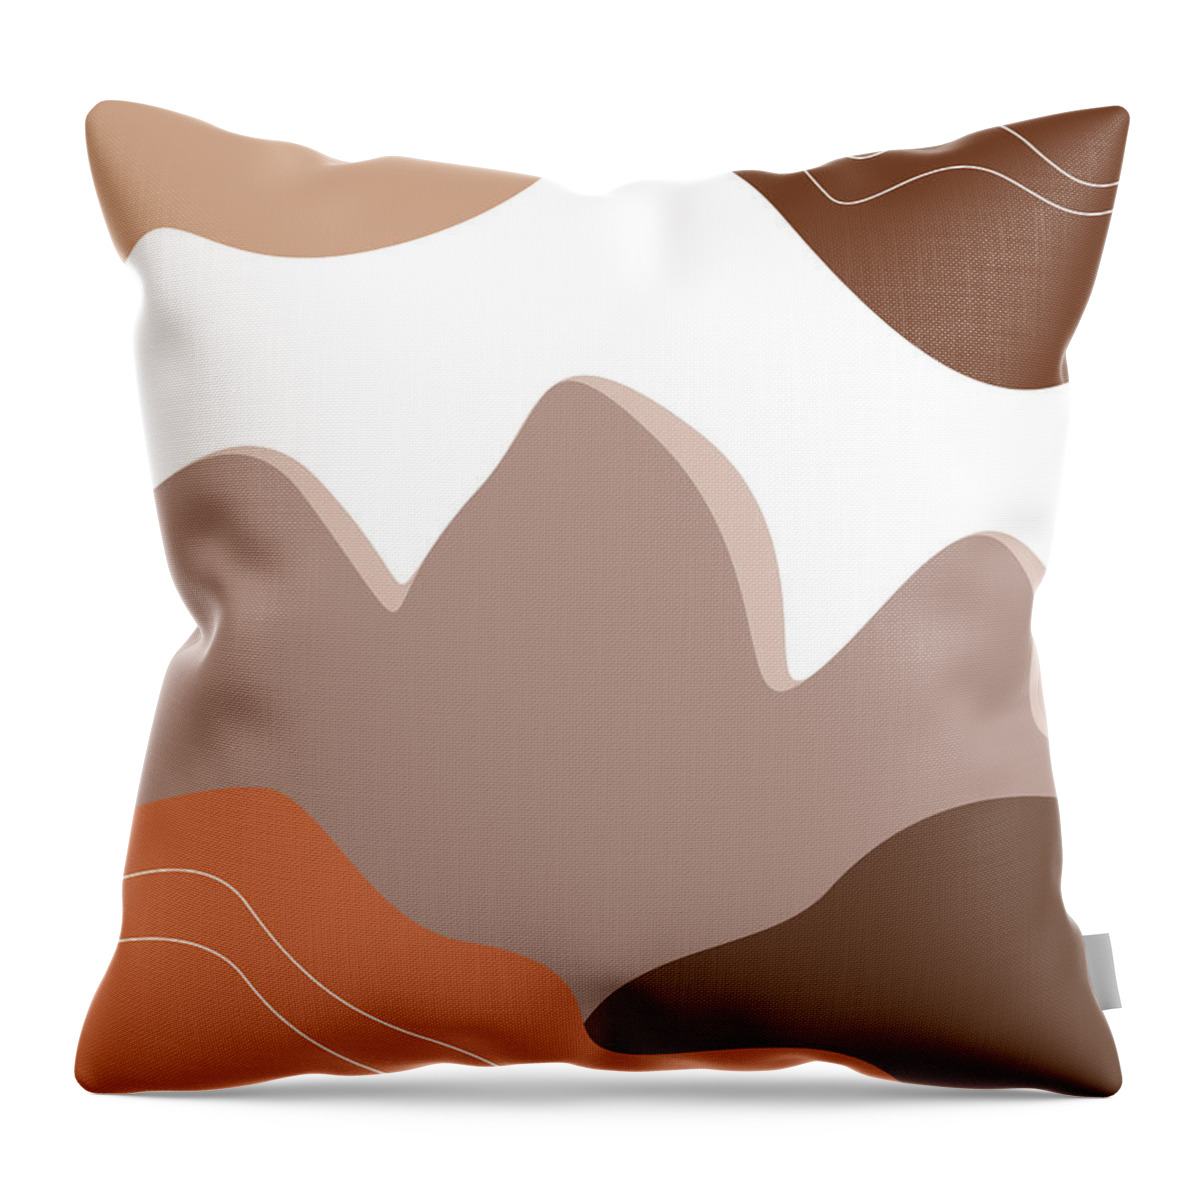 Mountains Throw Pillow featuring the mixed media Abstract Mountains 03 - Modern, Minimal, Contemporary Abstract - Terracotta Brown - Landscape by Studio Grafiikka